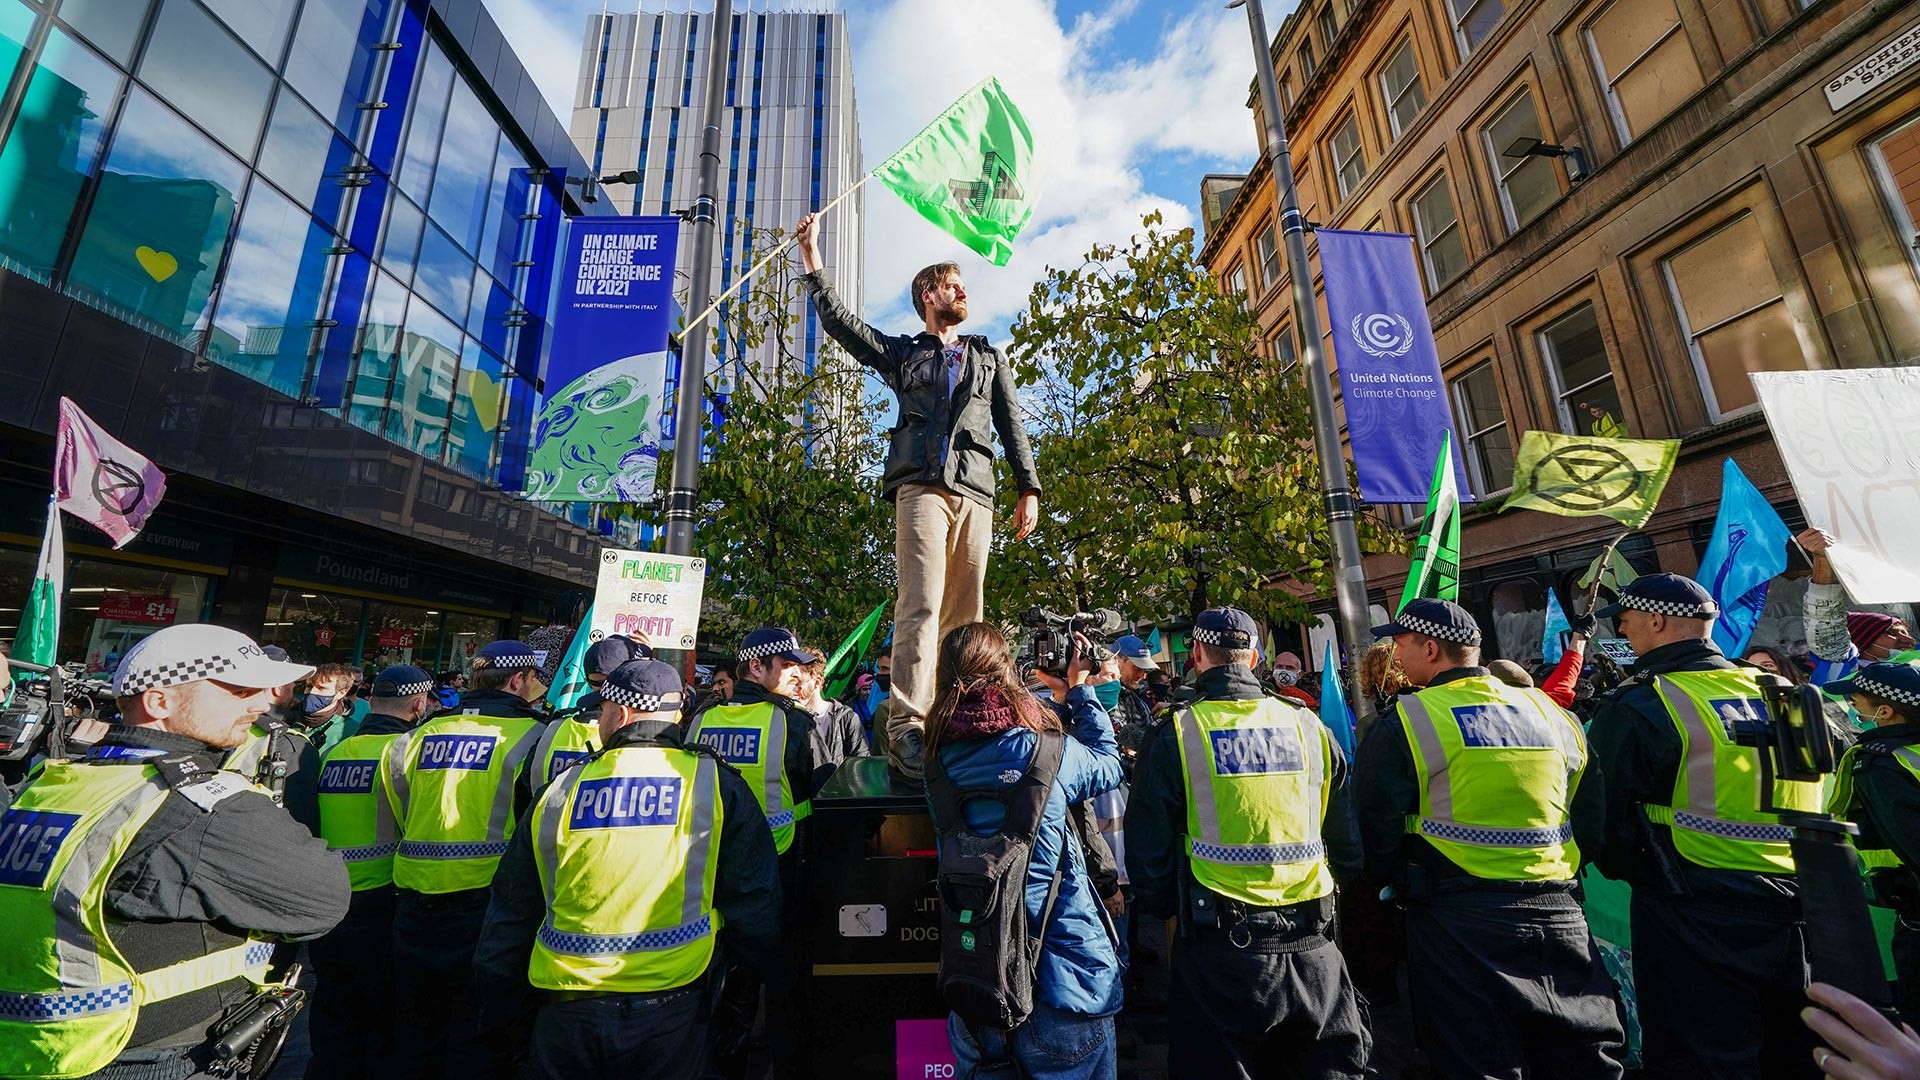 Police and demonstrators at an Extinction Rebellion protest on Buchanan Street, during the Cop26 summit in Glasgow.